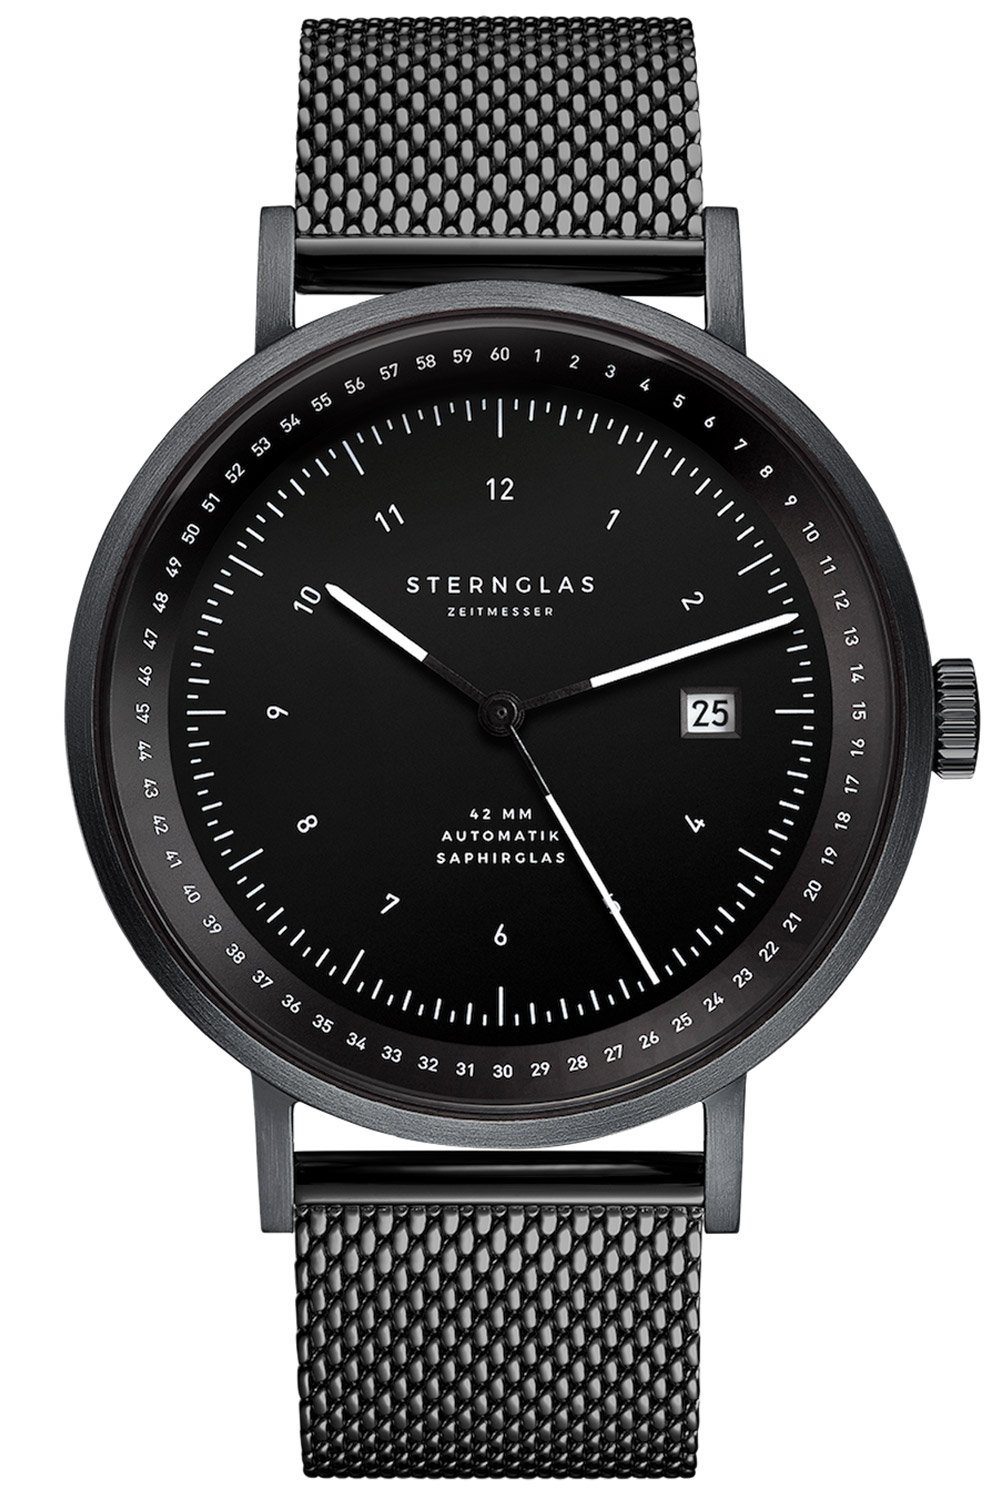 STERNGLAS Watches at low prices • uhrcenter Watch Shop